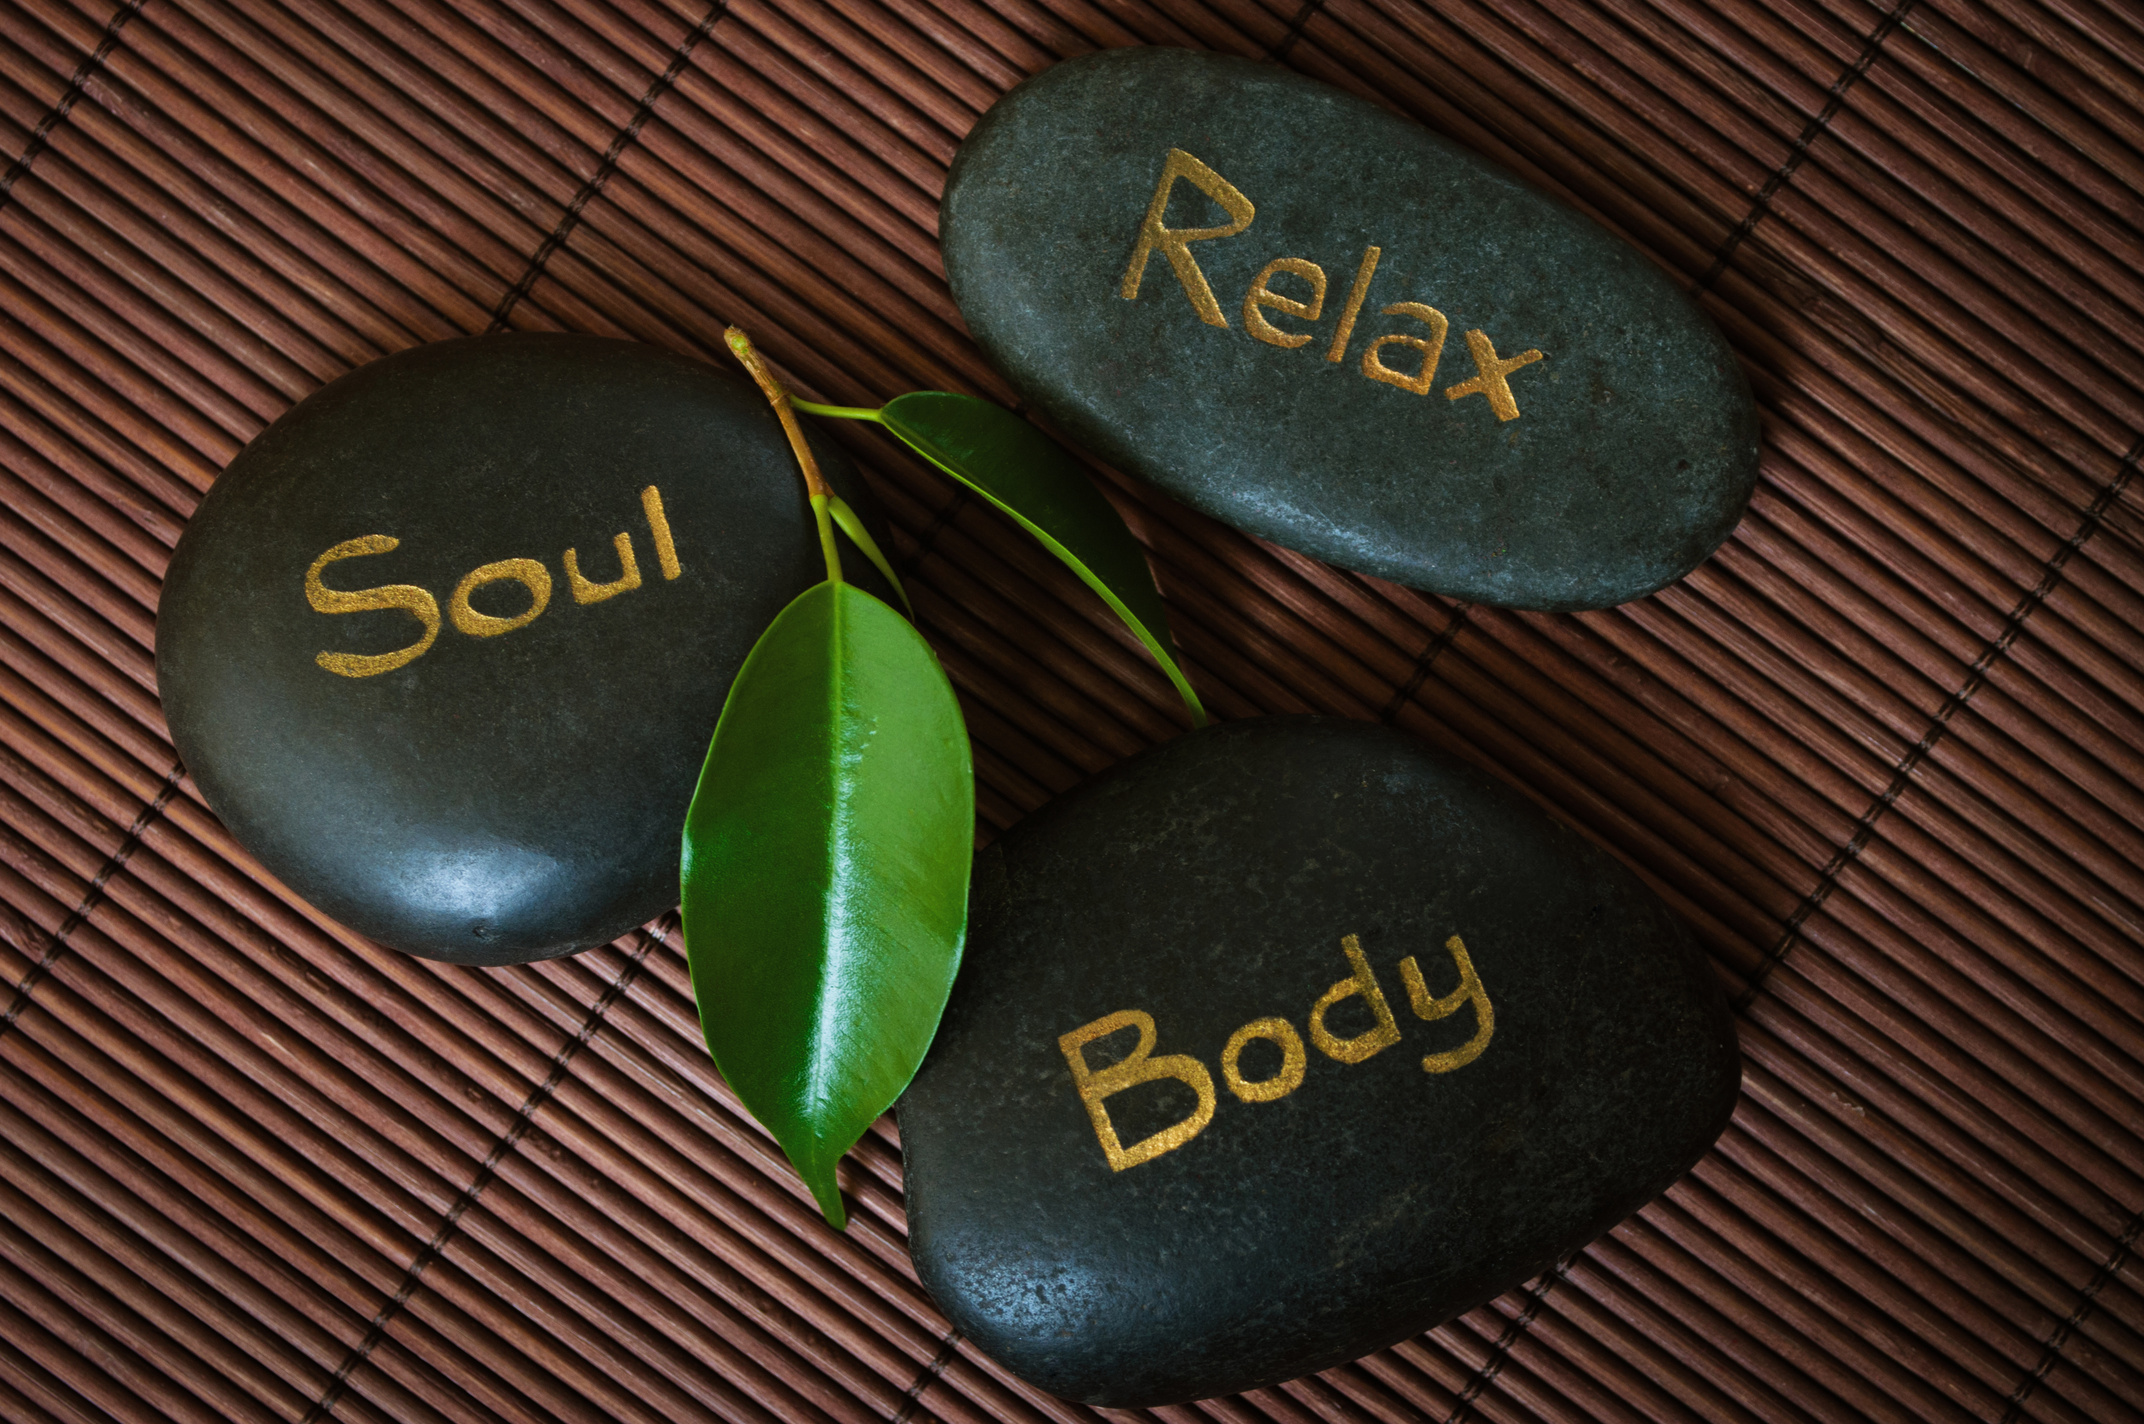 Black Massage Stones with Soul, Relax, and Body Text Flatlay